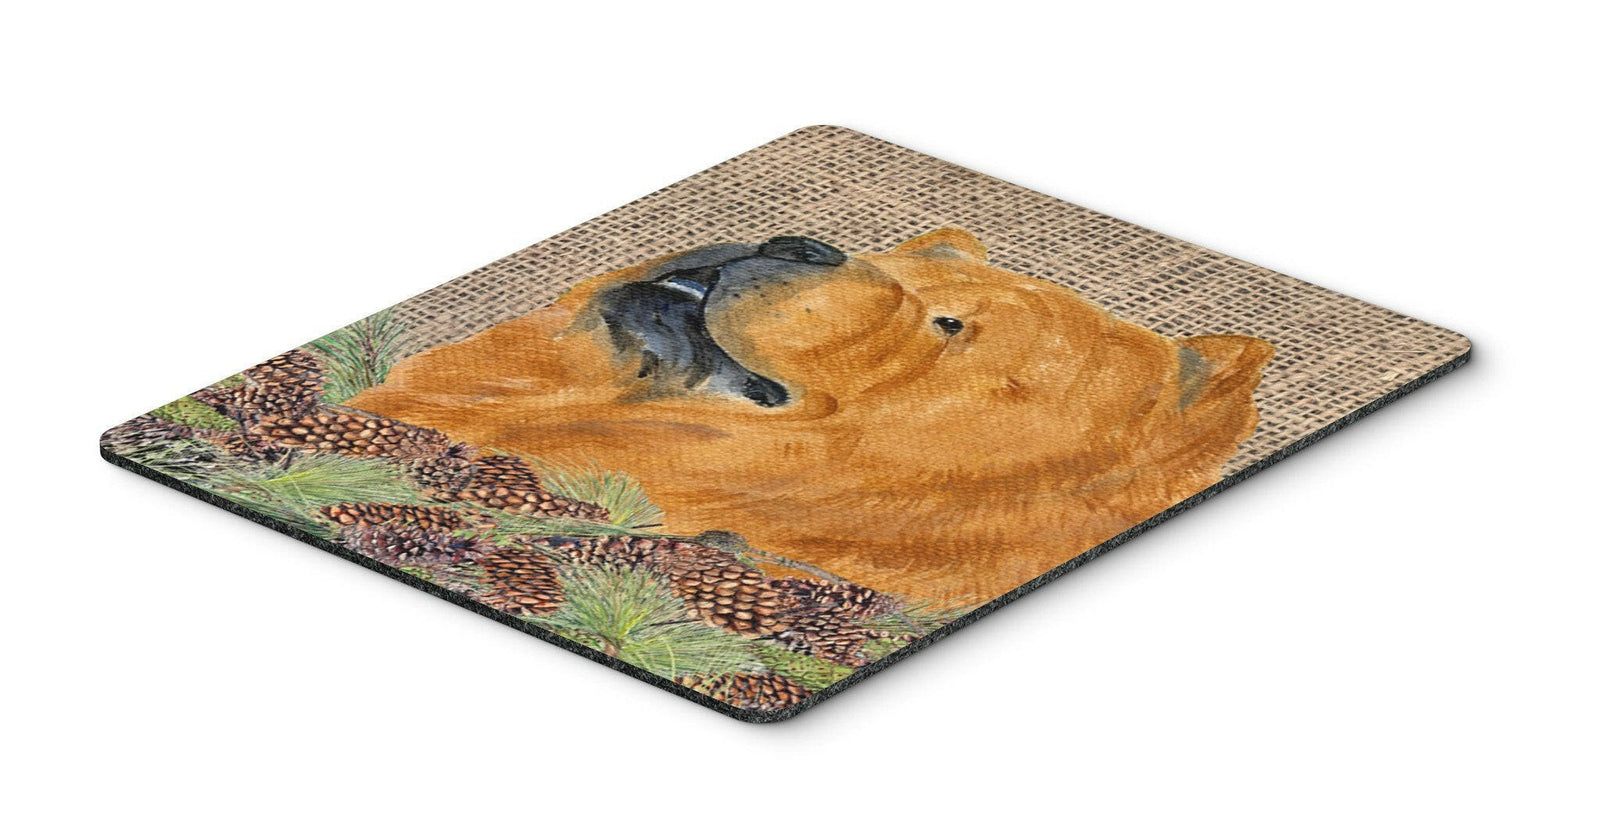 Chow Chow Mouse Pad, Hot Pad or Trivet by Caroline's Treasures